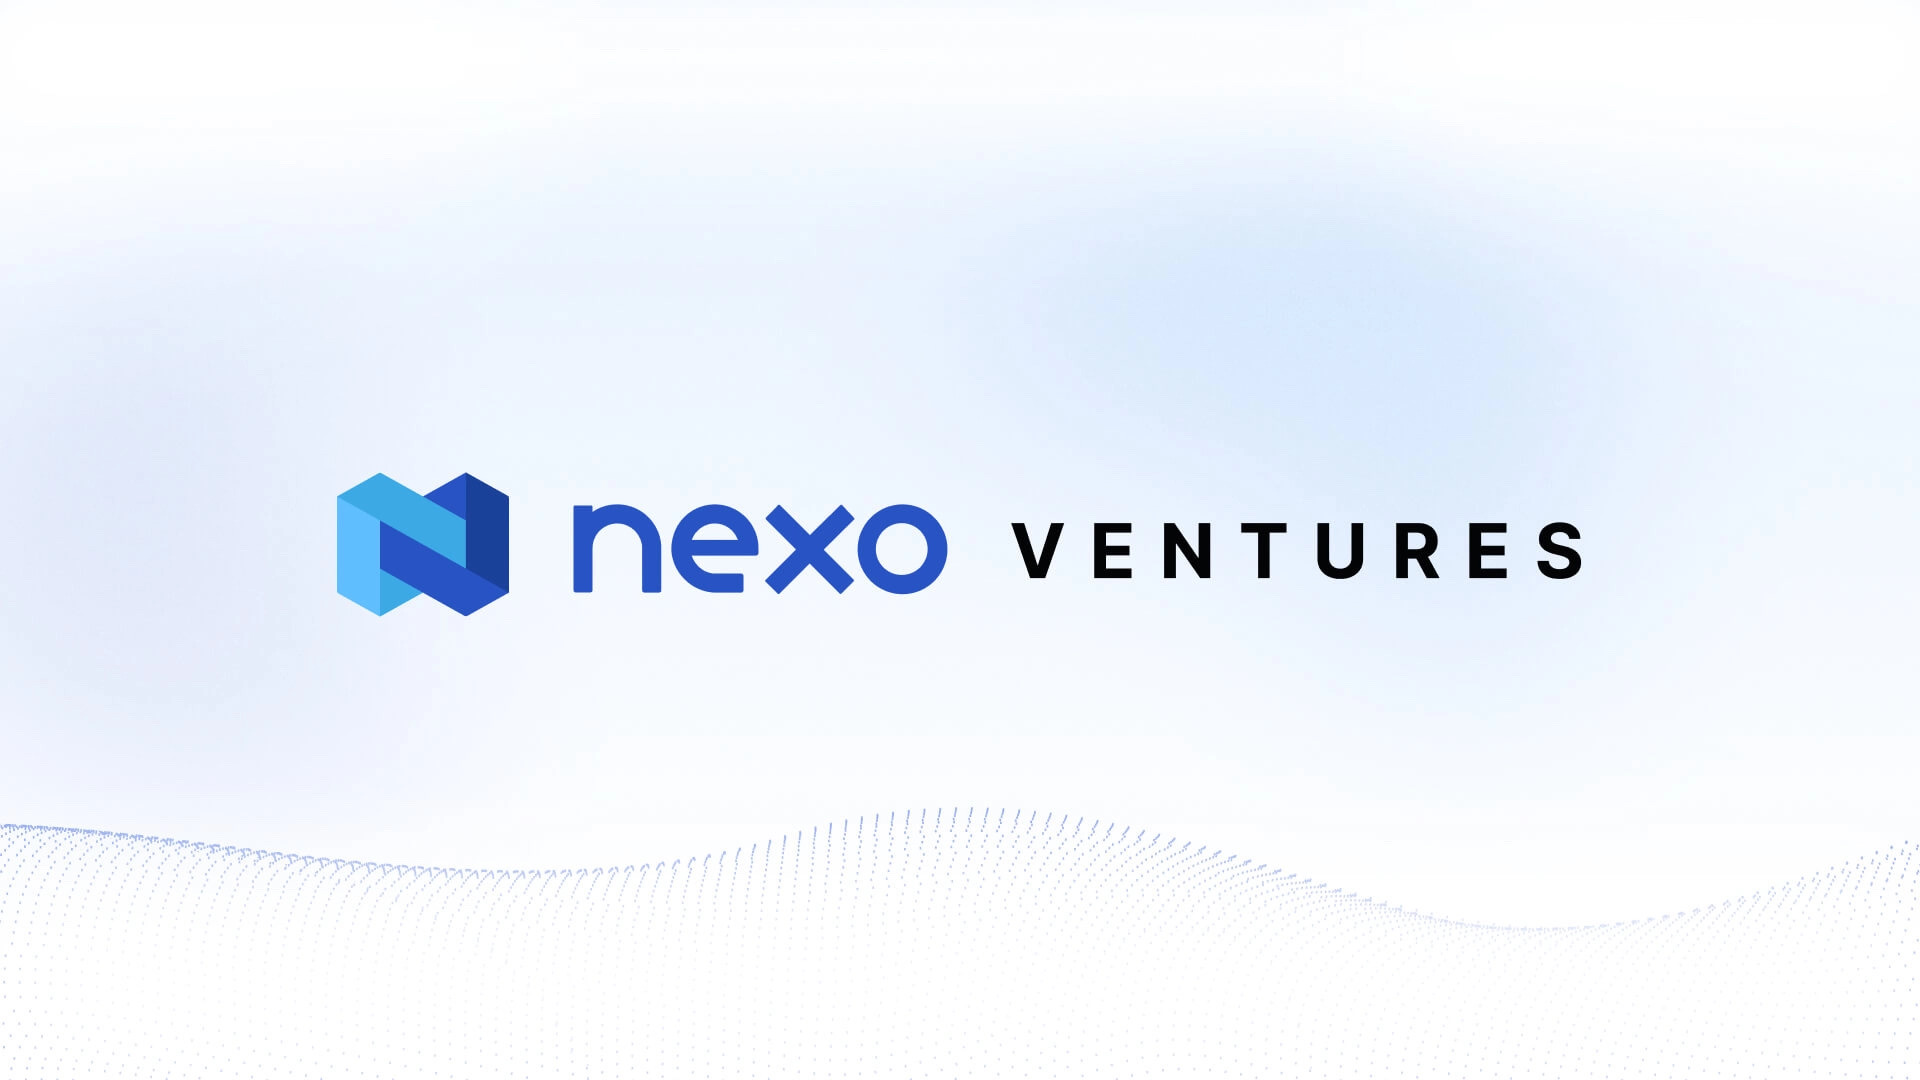 Nexo launches a $ 150 million investment fund focused on exploiting the Web3 space